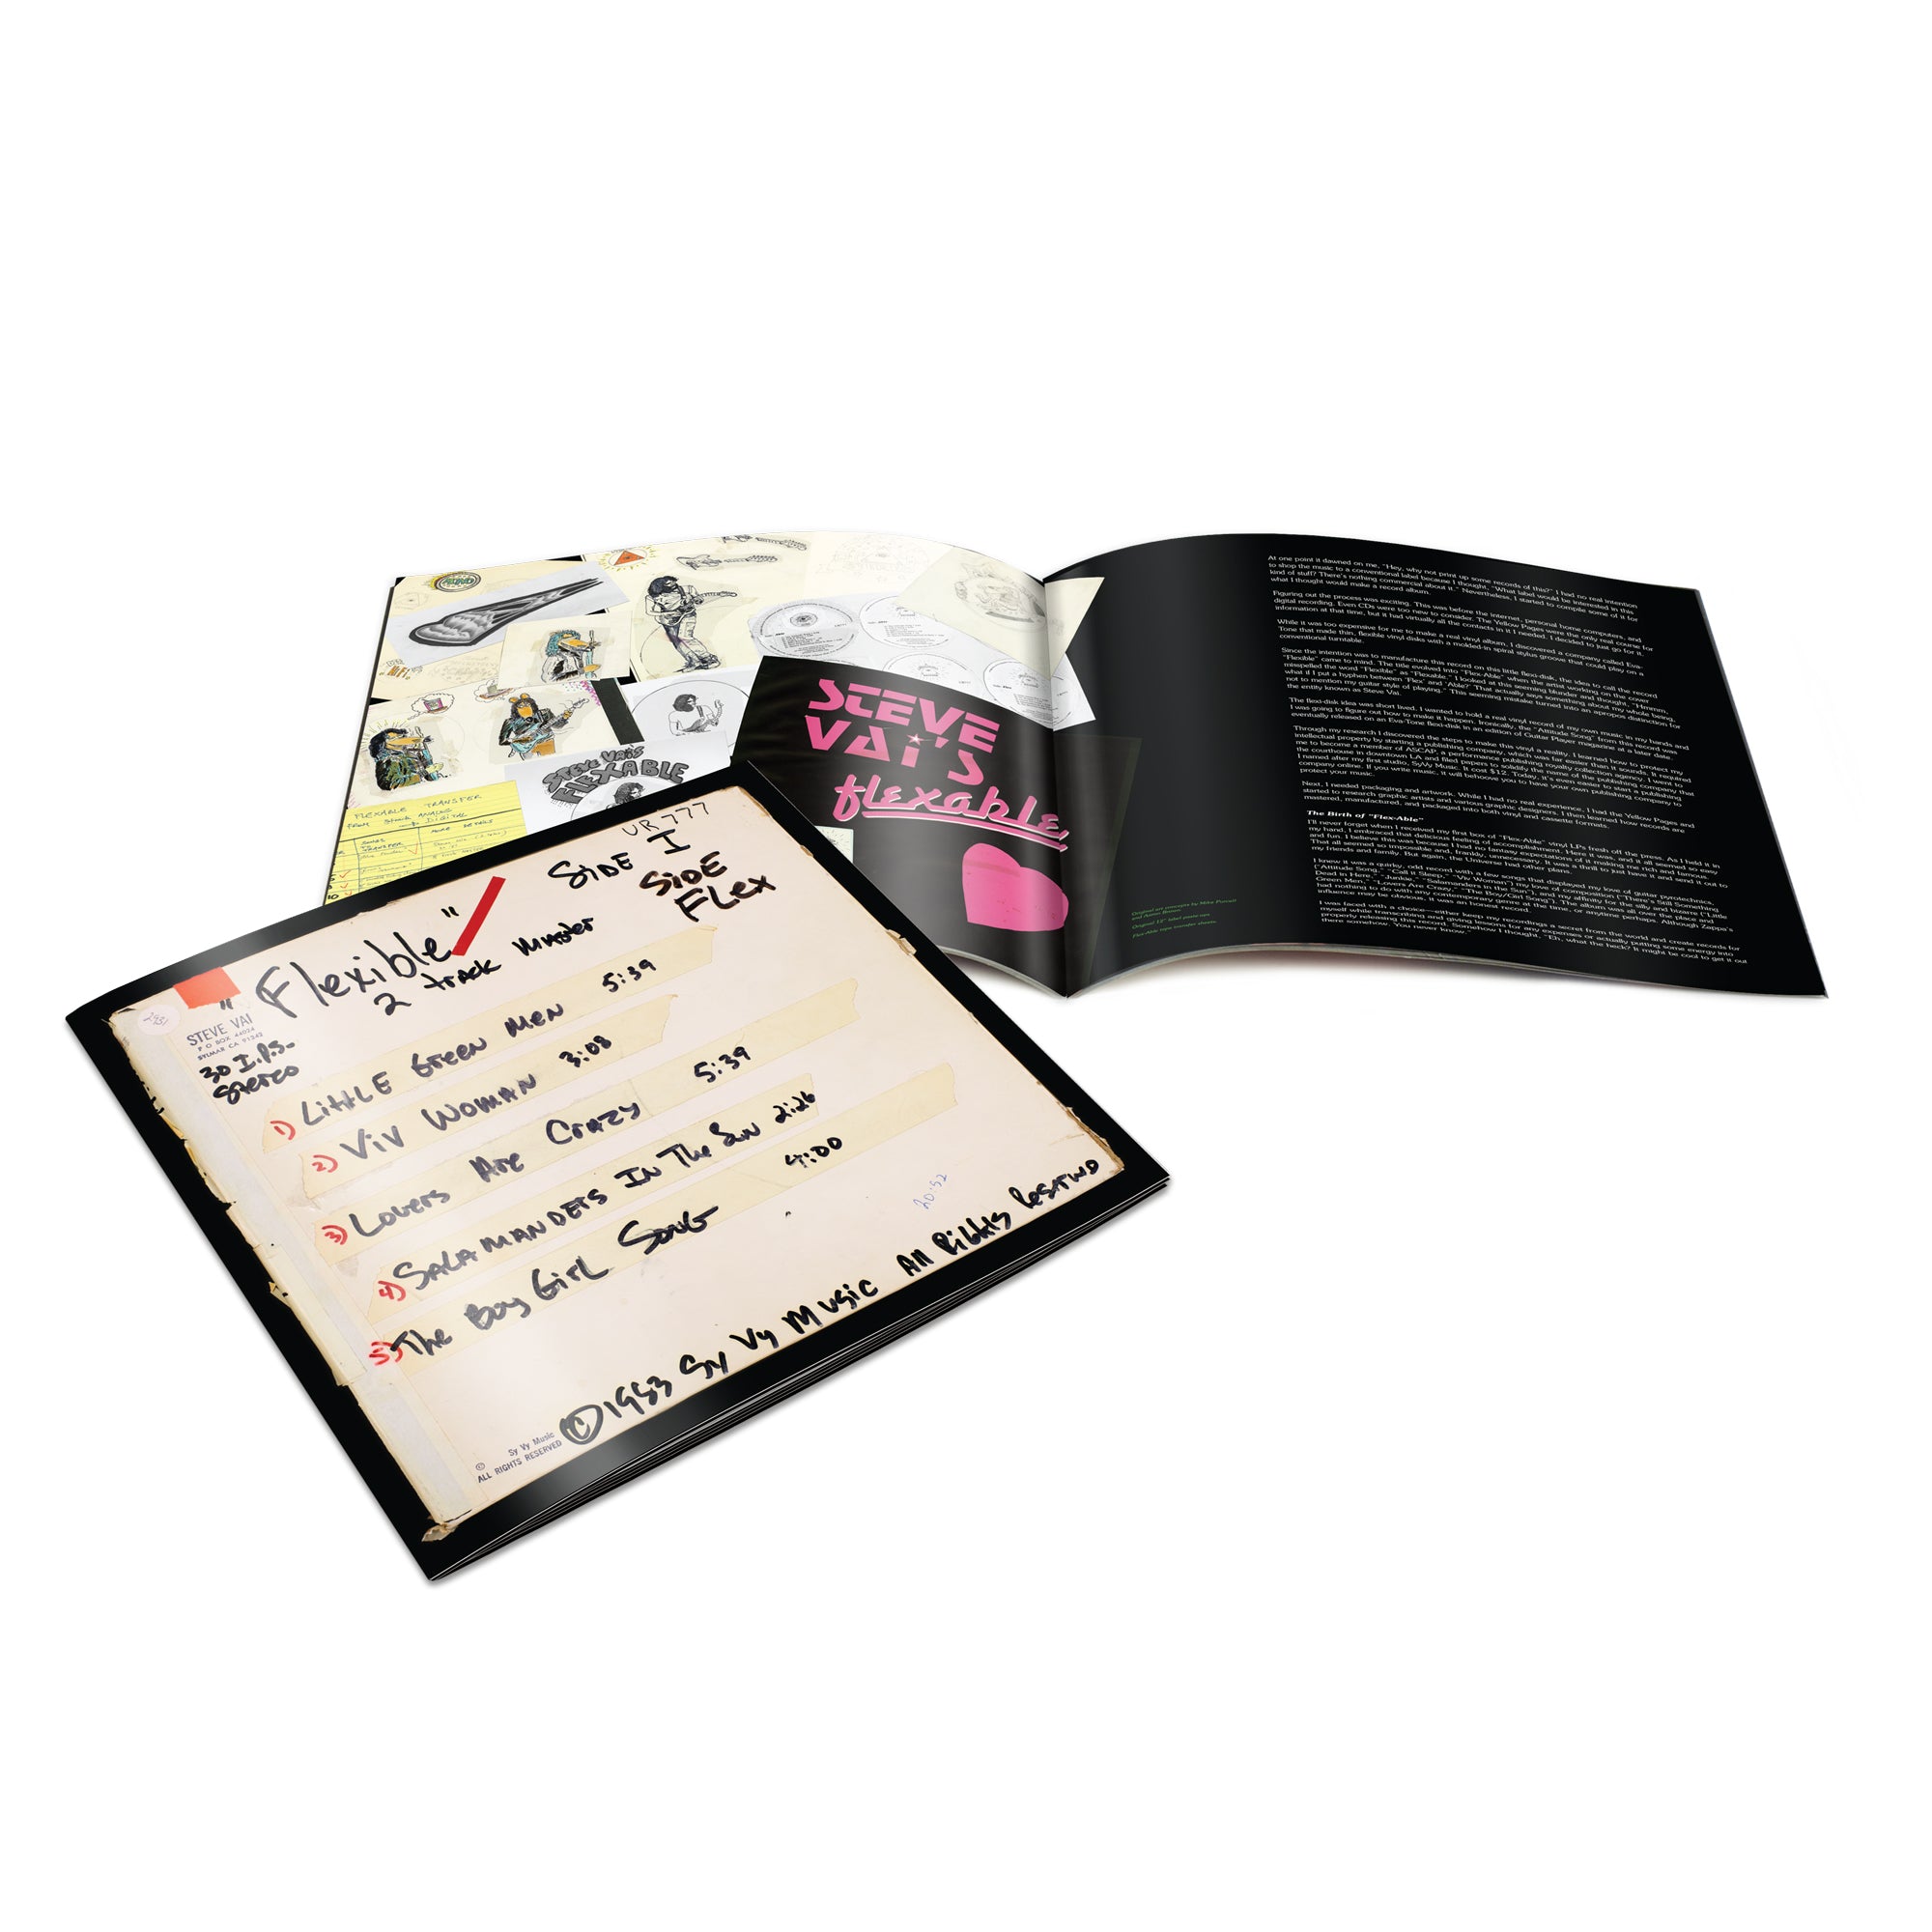 Image of the booklet insert included in steve vai's flexible album. There are hand written lyrics and text lyrics in the booklets.